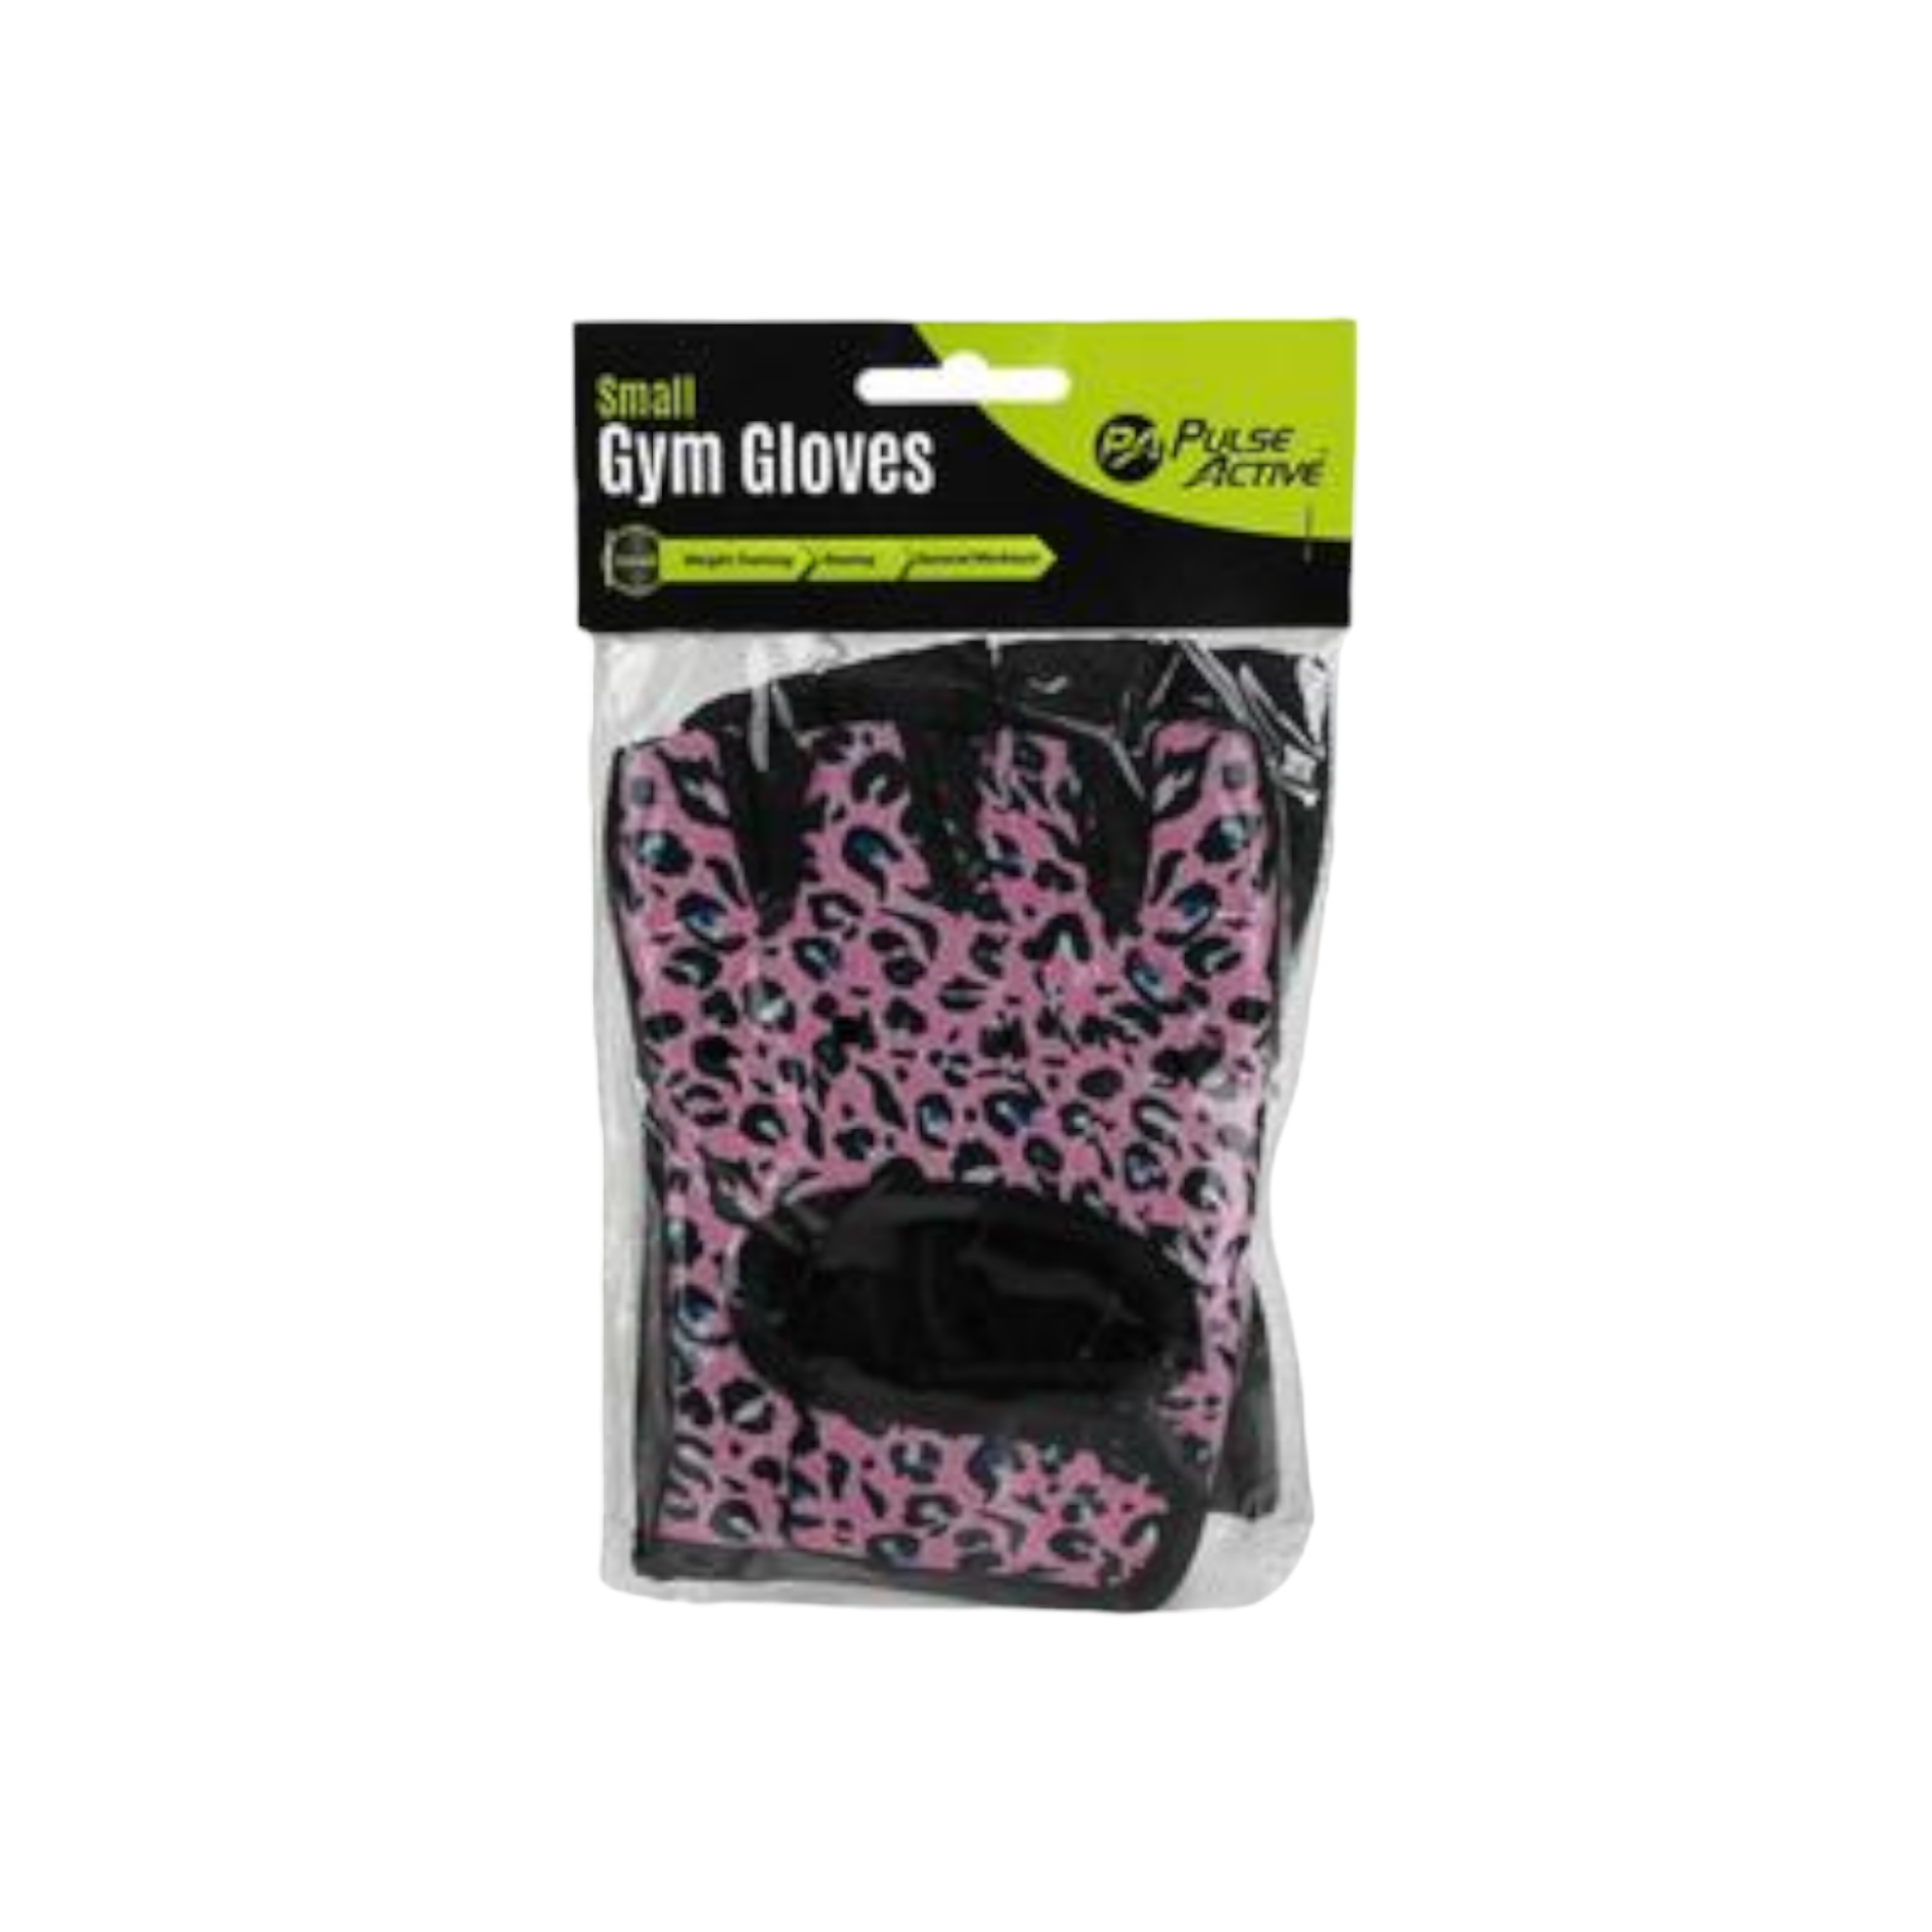 Fitness Gym Gloves Women Assorted 2pc